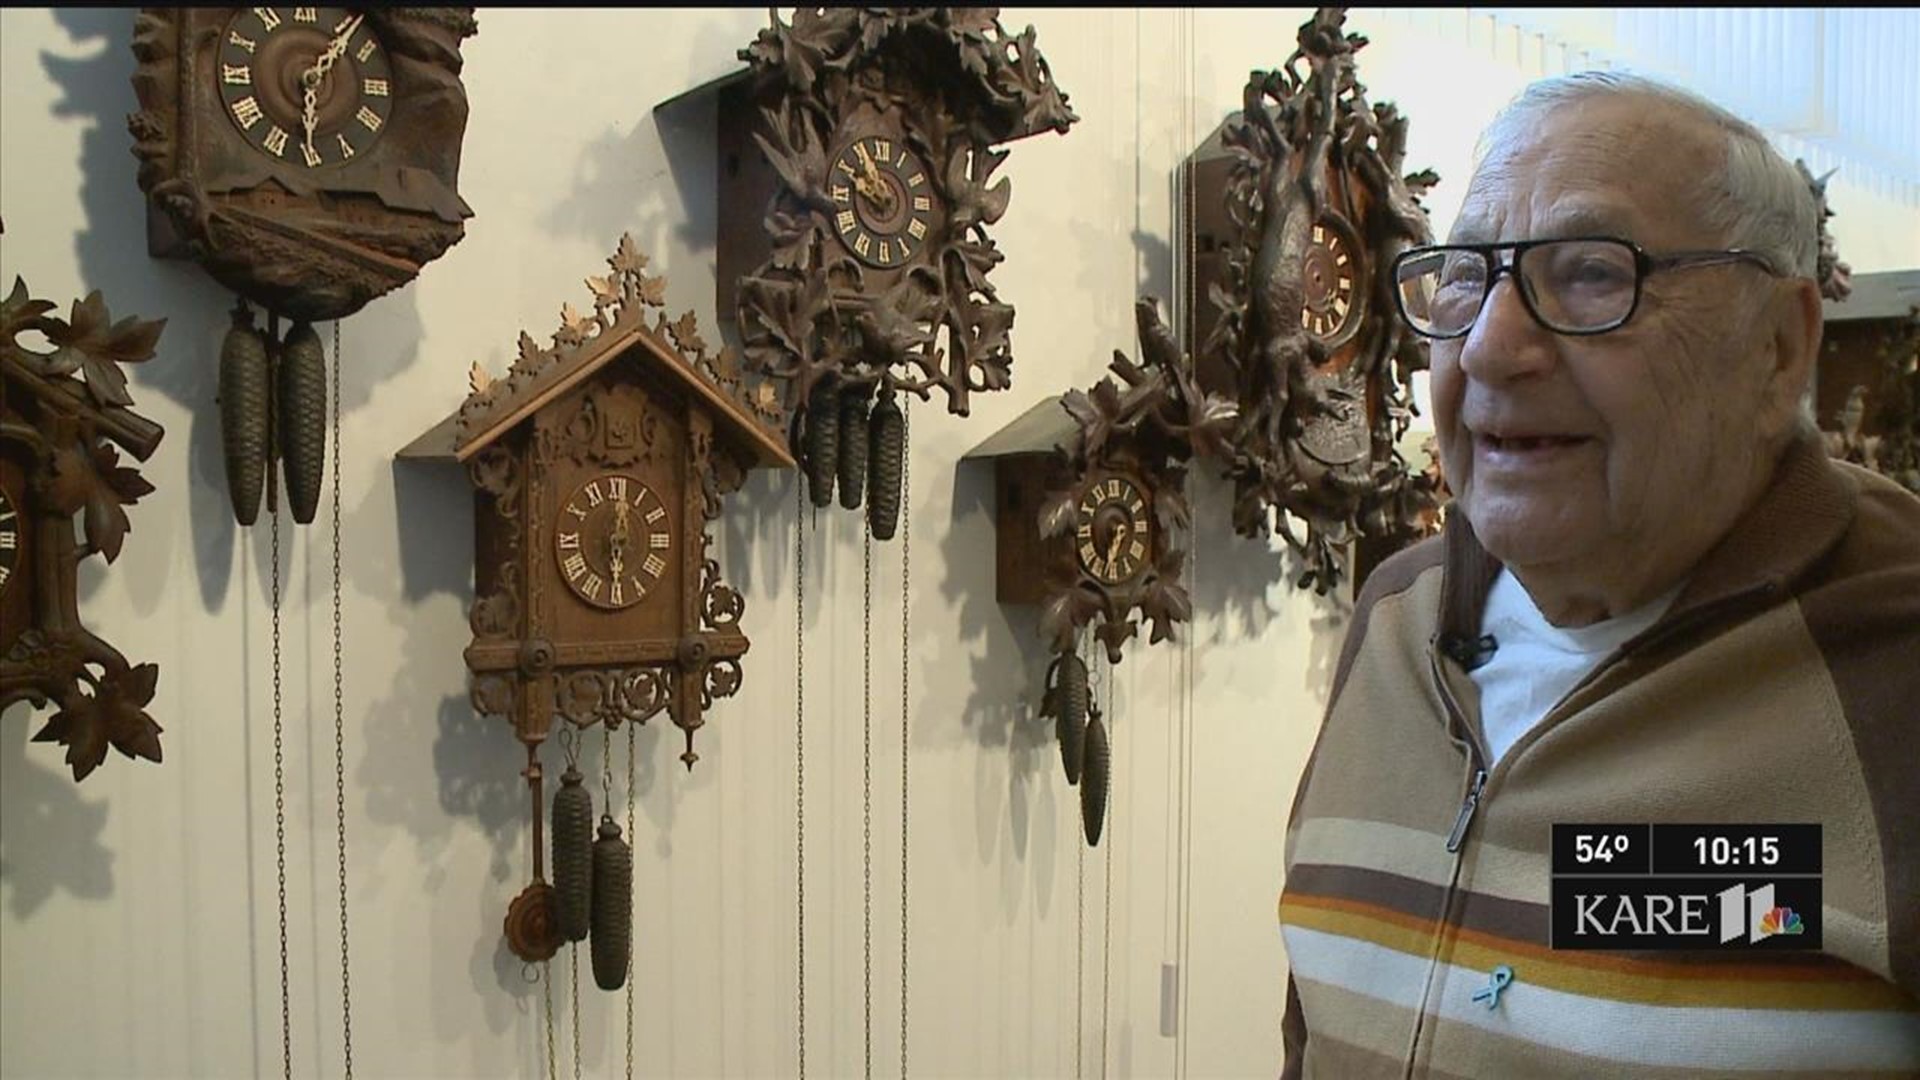 Jim Fiorentino spent decades collecting Cuckoo Clocks. Now, four years after his death, the collection is about to become a public museum.